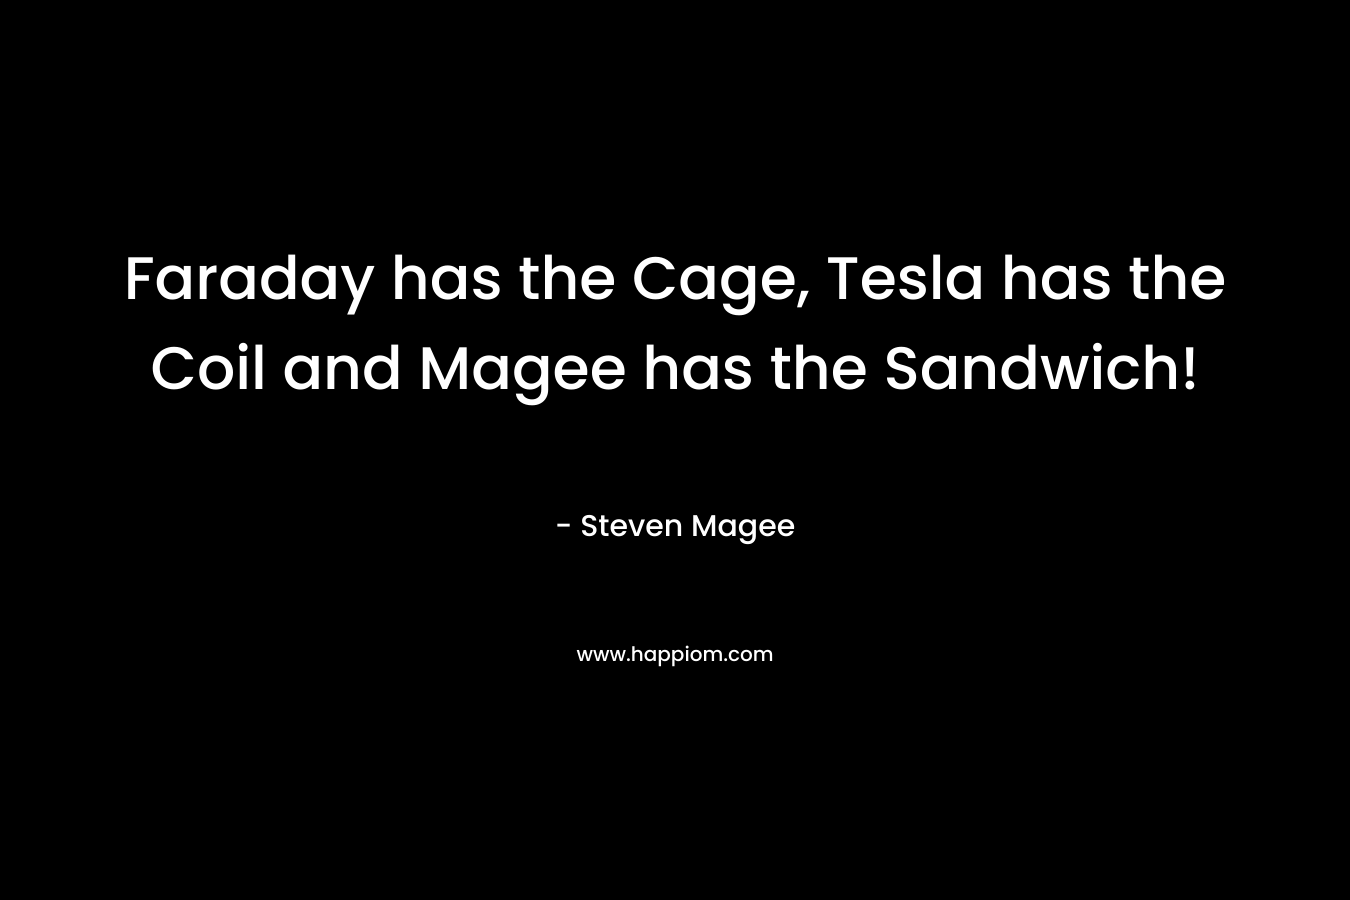 Faraday has the Cage, Tesla has the Coil and Magee has the Sandwich!